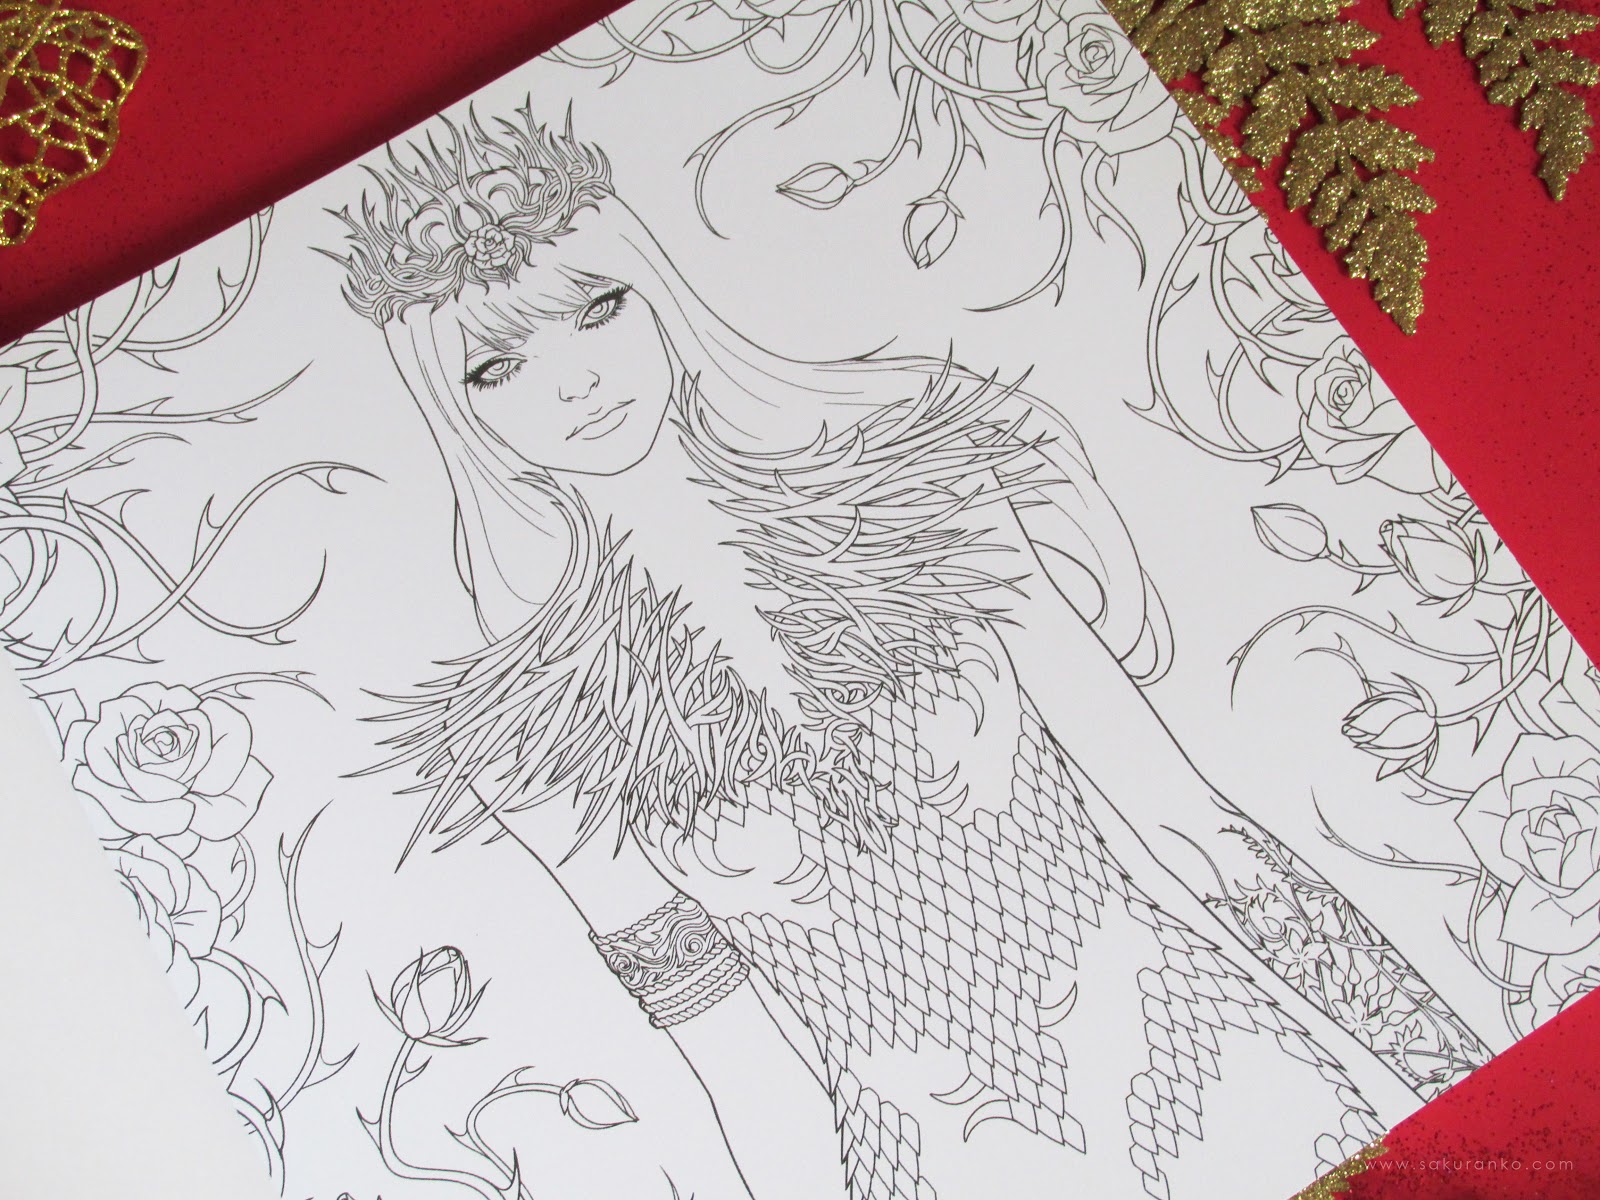 A court of thorns and roses coloring book - polish, but the pictures  inside and the cover are the same :)